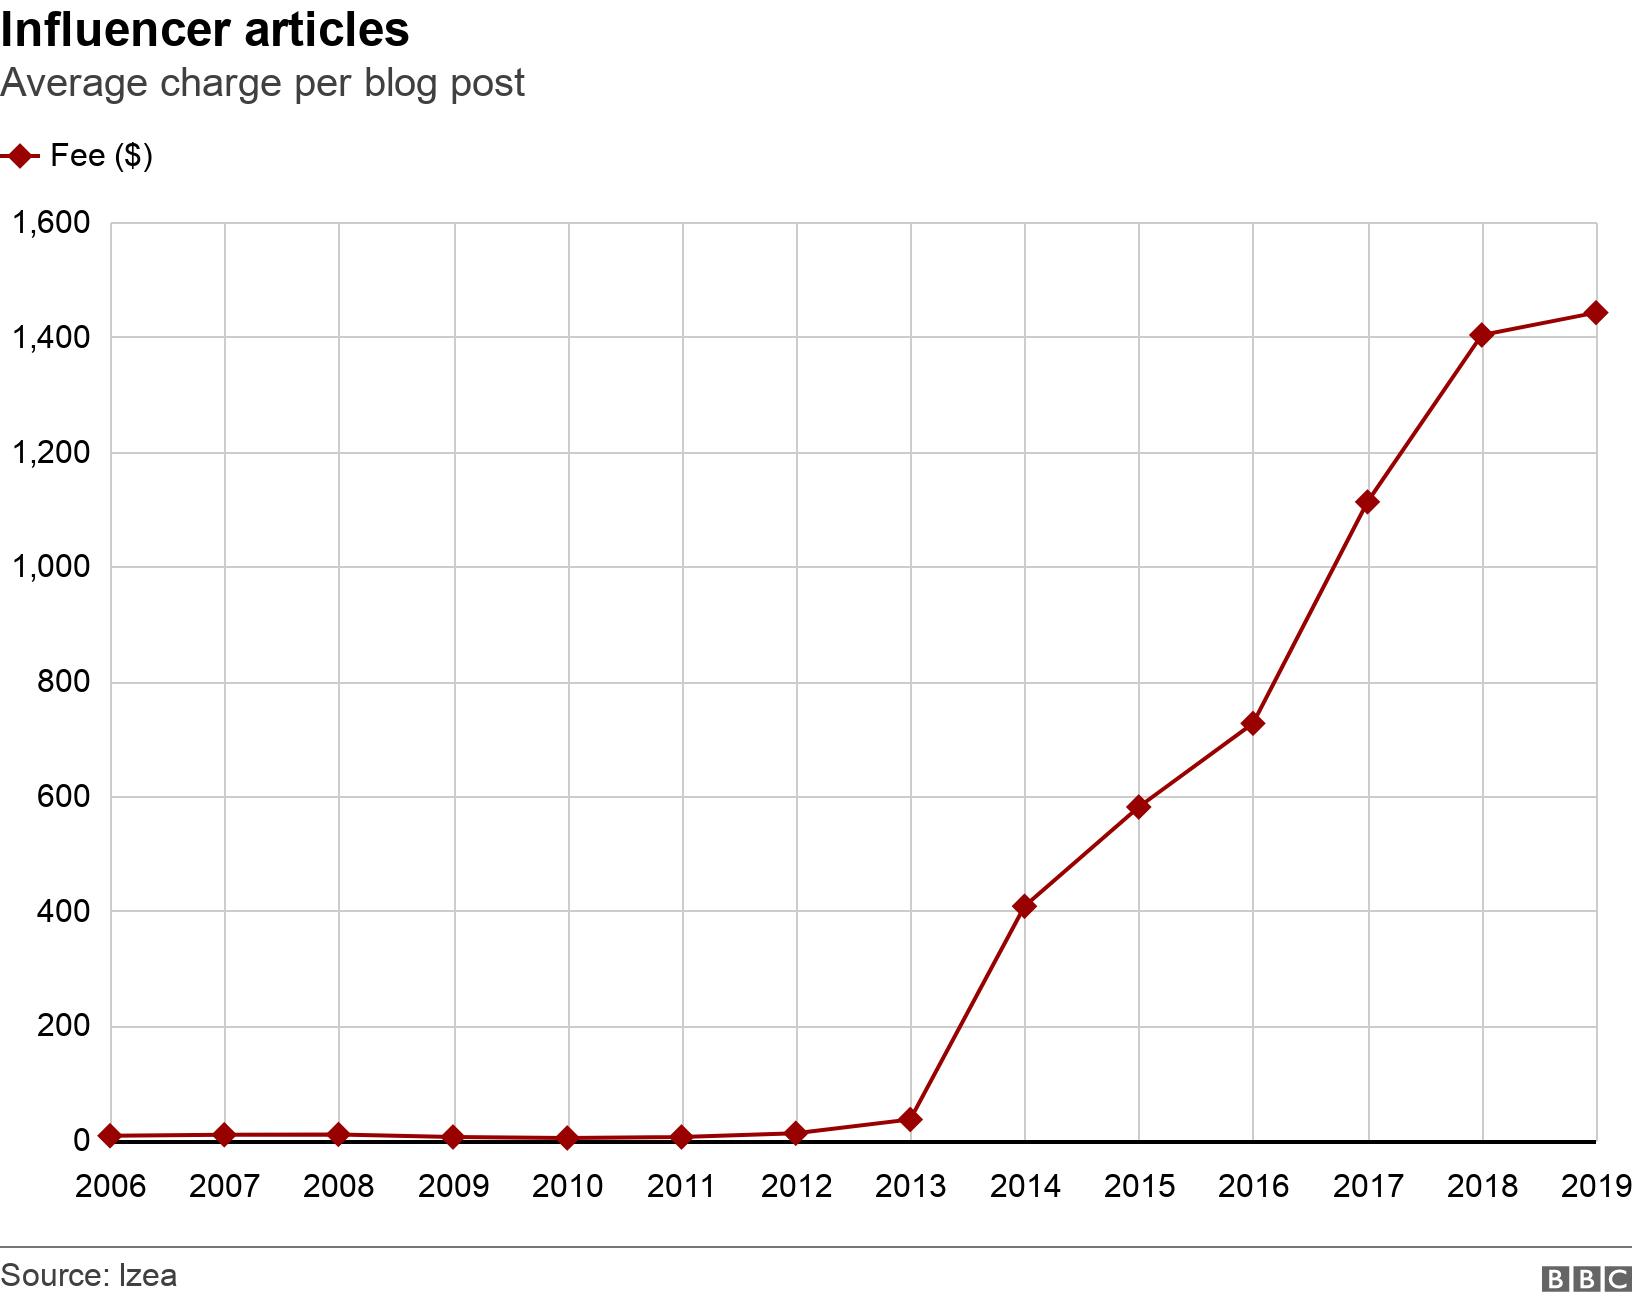 Influencer articles. Average charge per blog post. Influencers charged $7.39 per blog post in 2006 and $1442.27 in 20 .